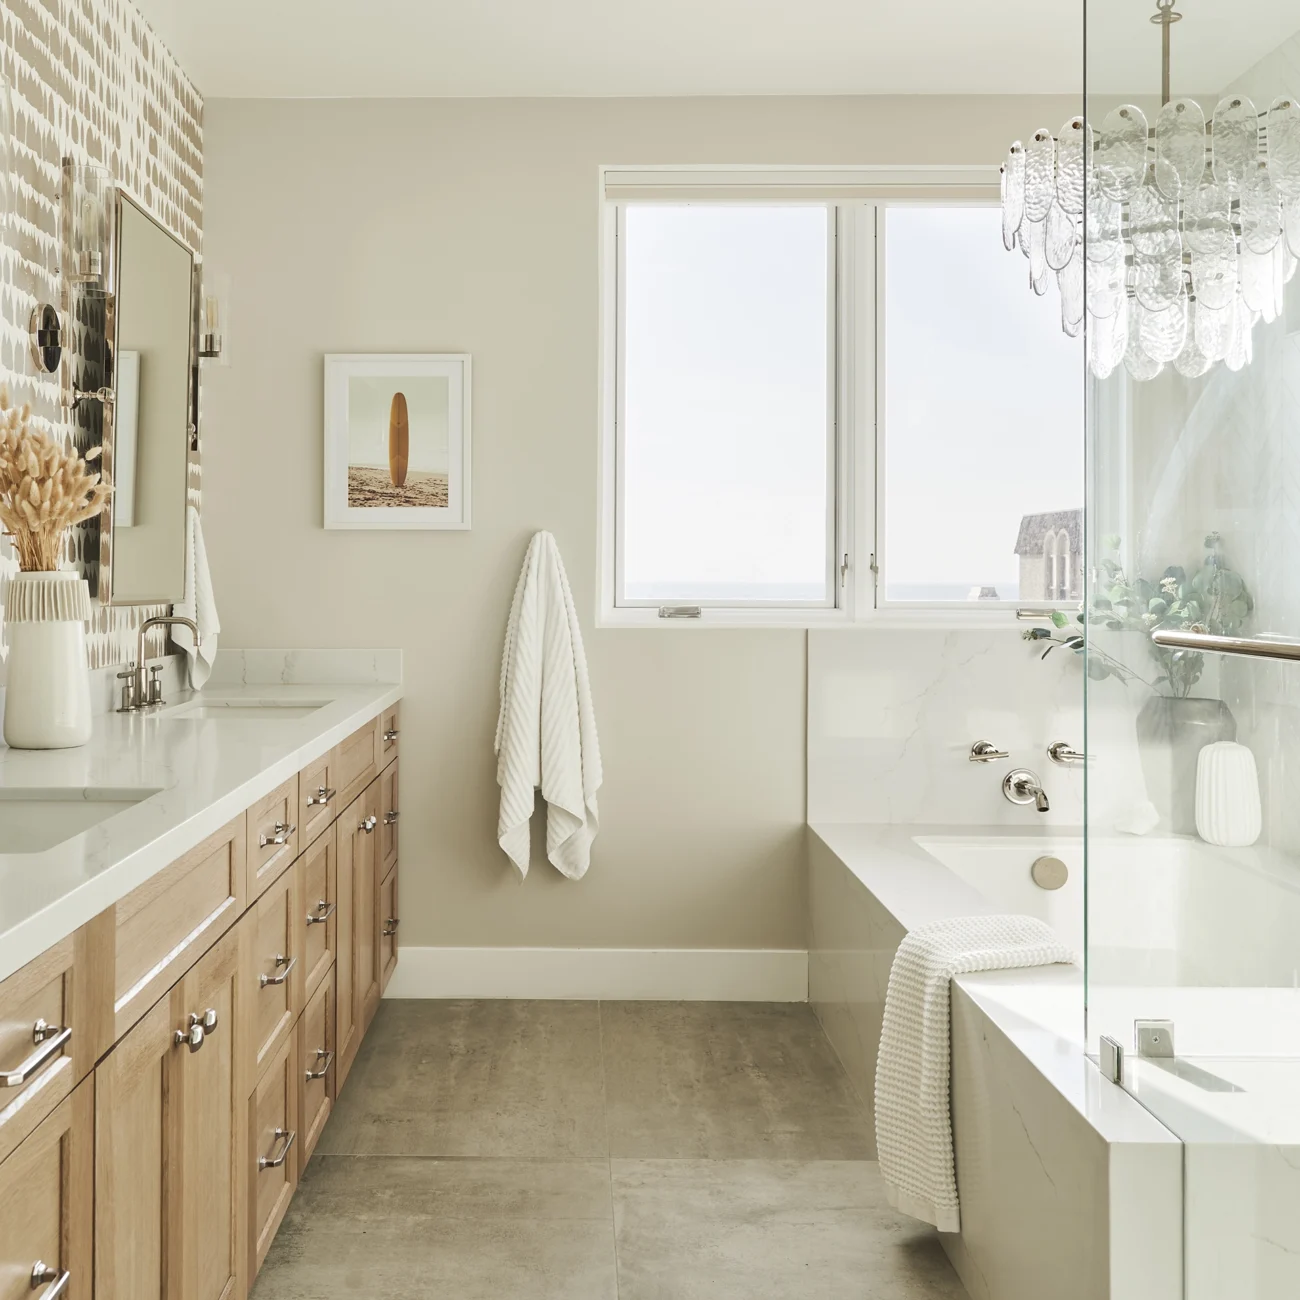 Christine Vroom Interiors | 27th | bright, costal bathroom with chandelier and soaker tub